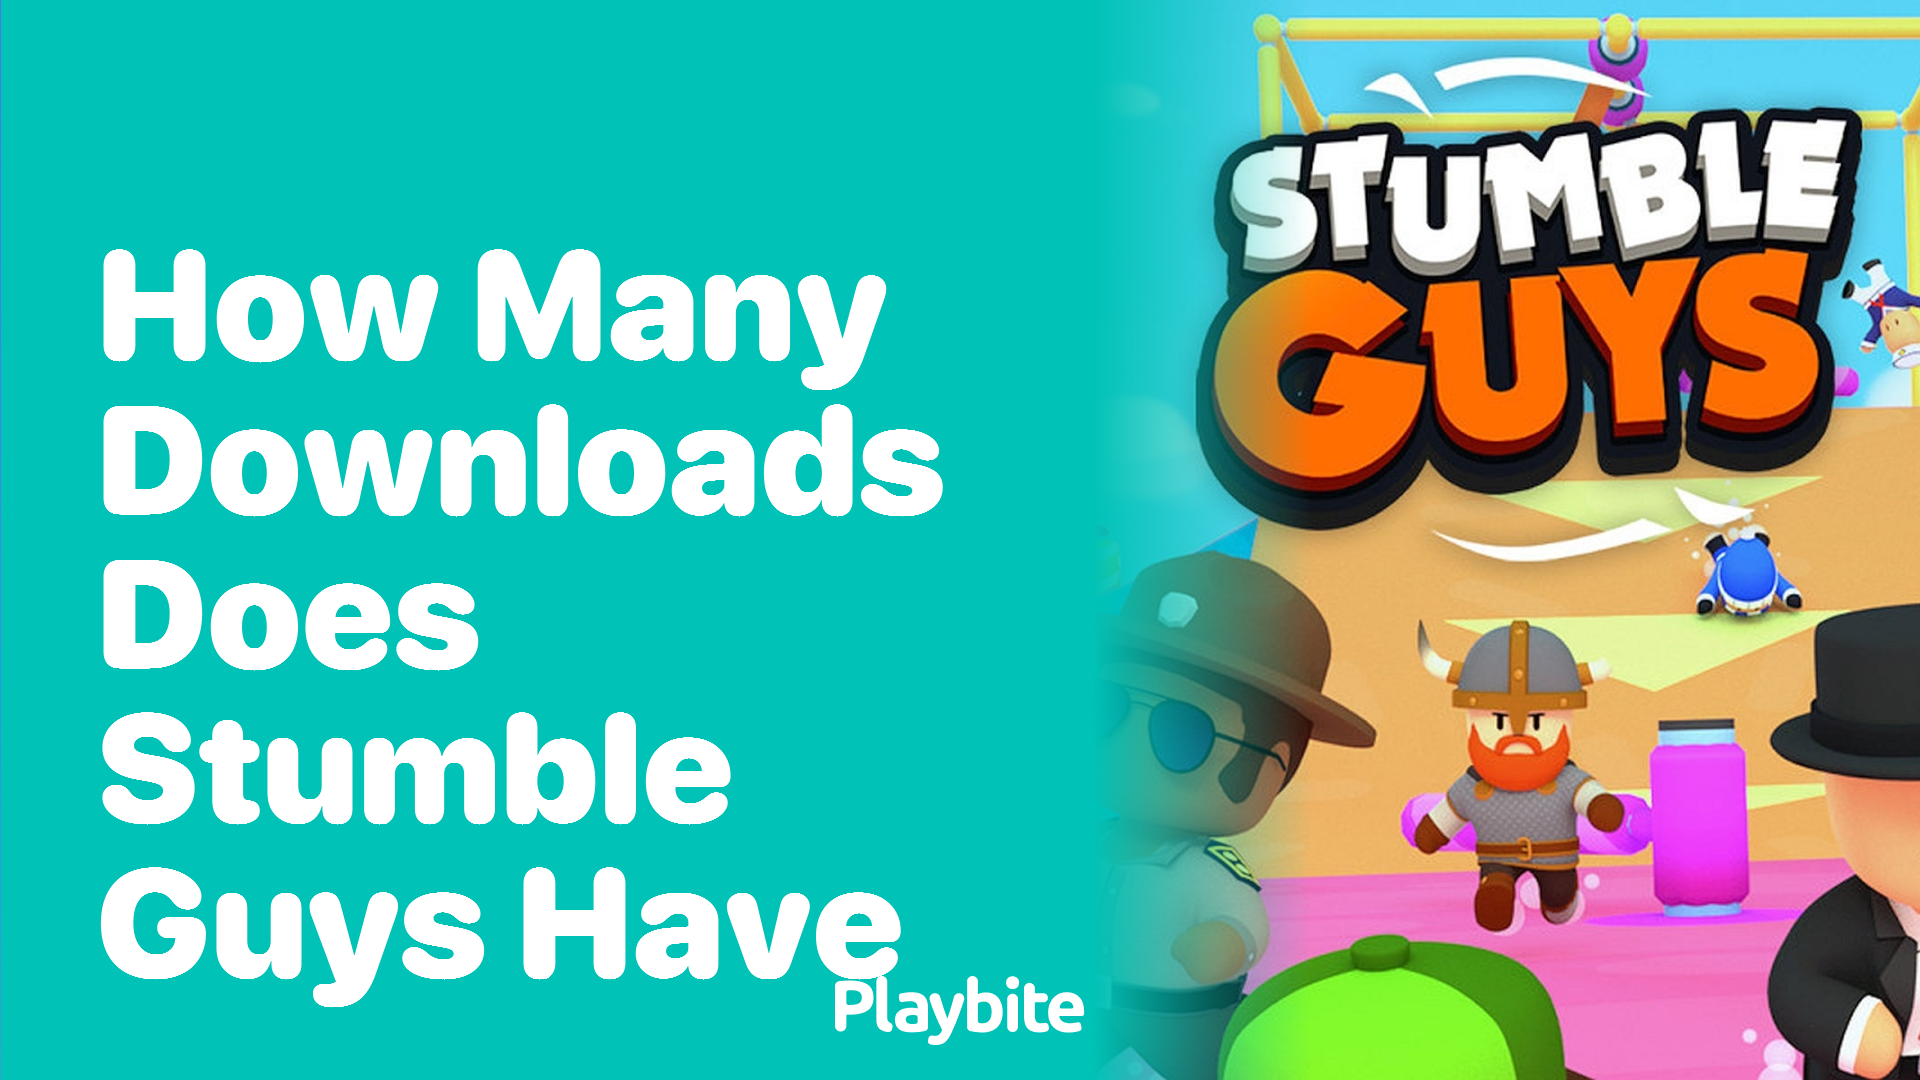 How Many Downloads Does Stumble Guys Have?